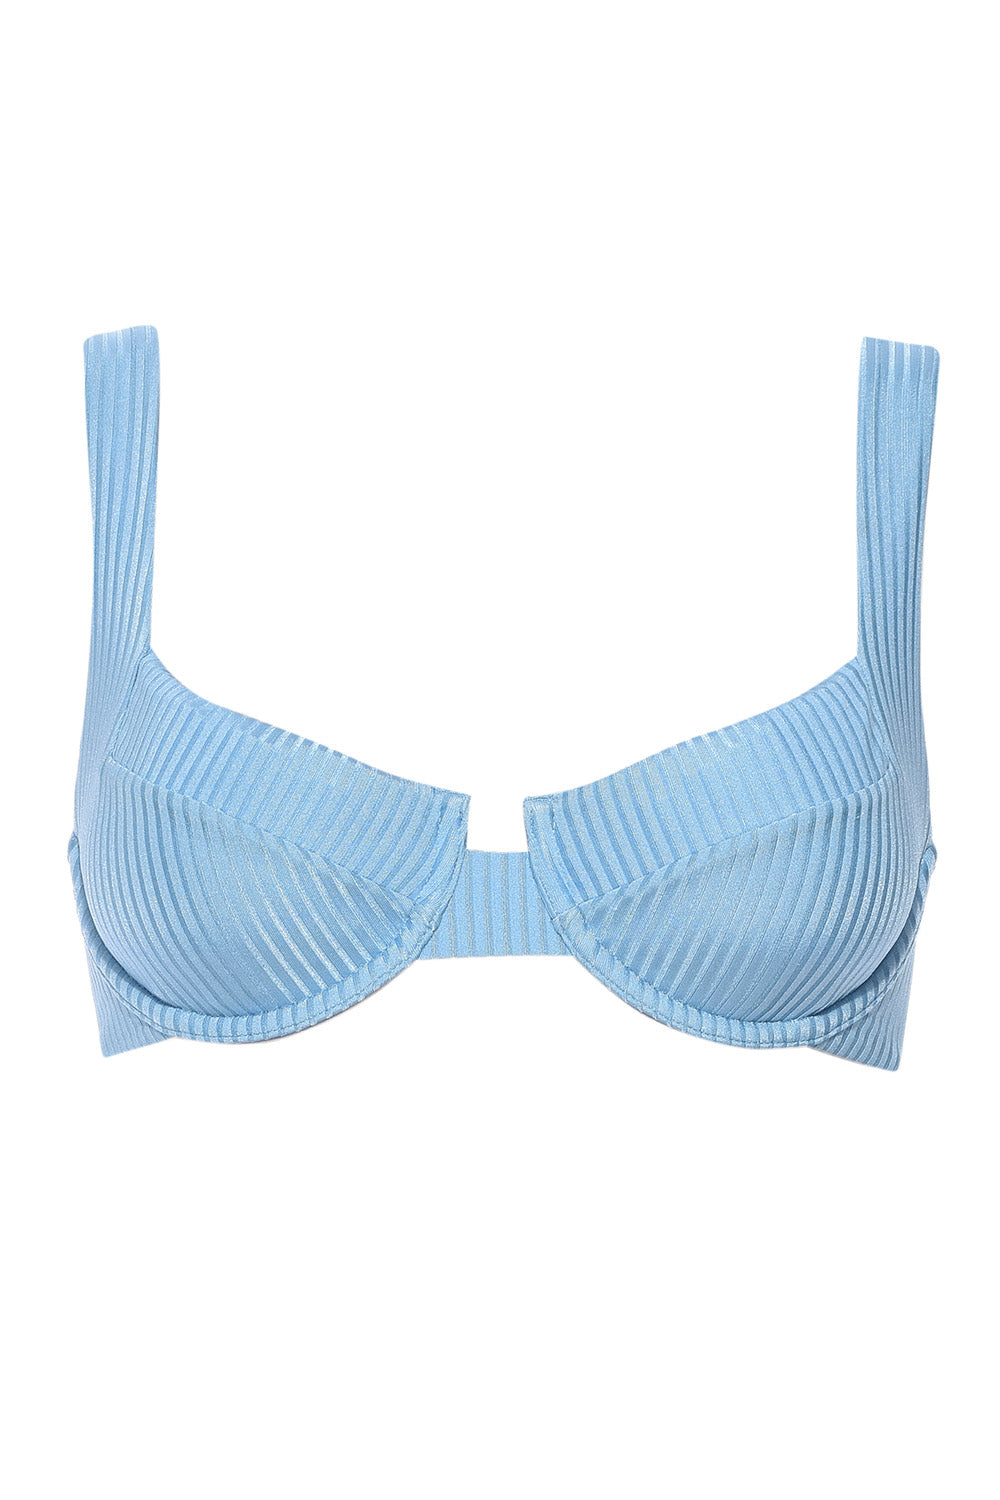 Top of Laguna bikini baby blue ribbed on a white background front view.